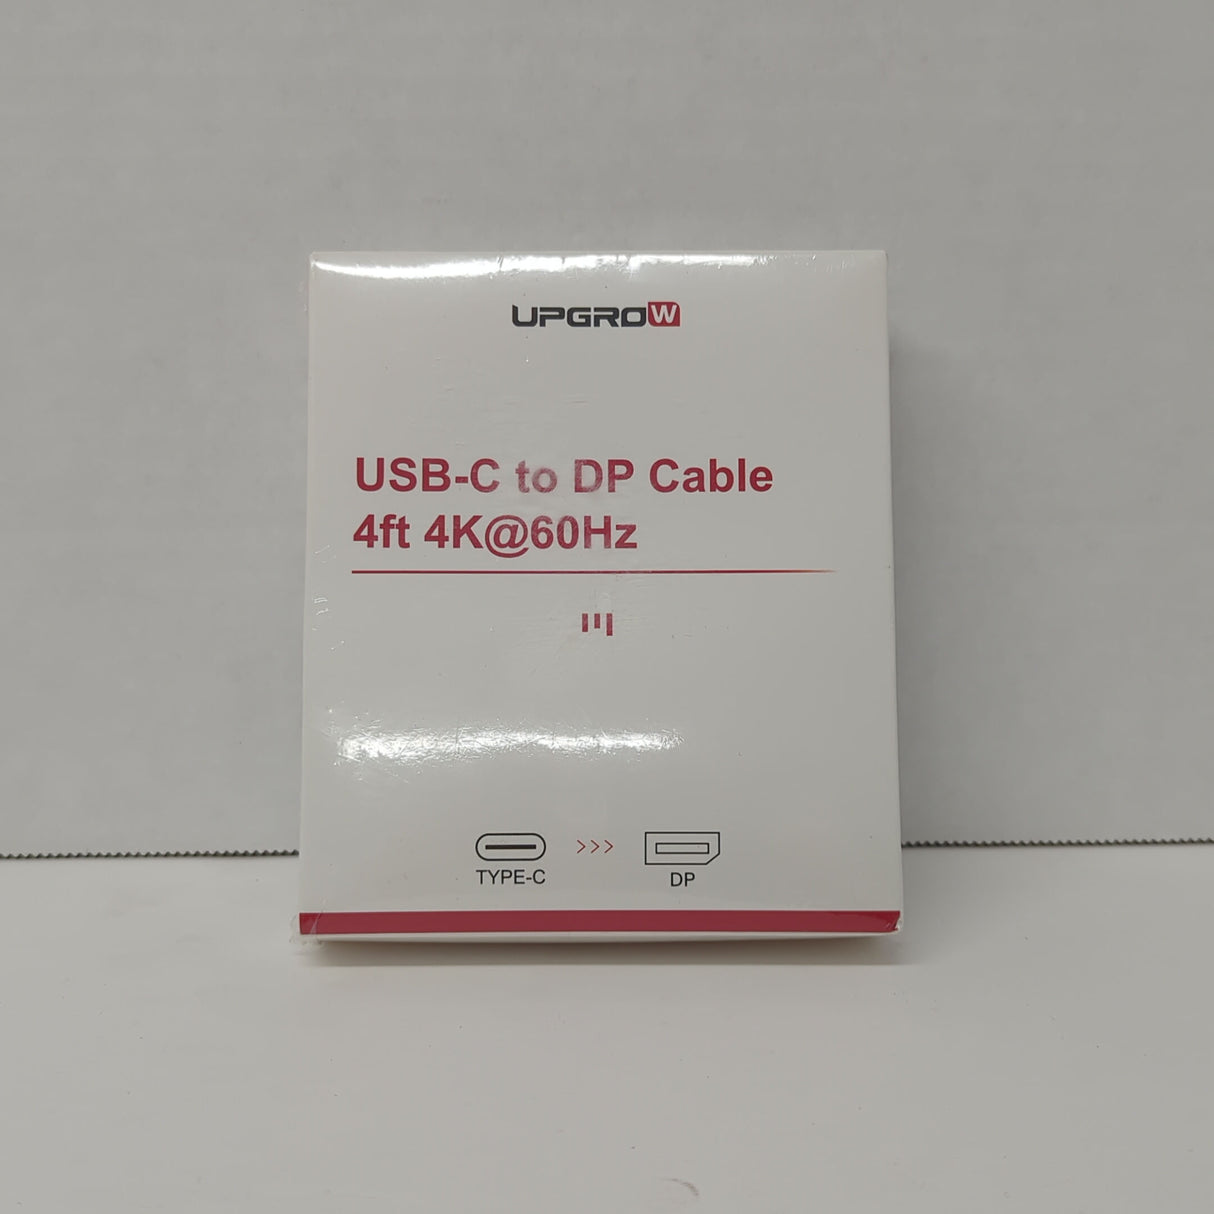 UPGROW - USB-C to DP Cable - 4ft, 4K, 60 Hz - New